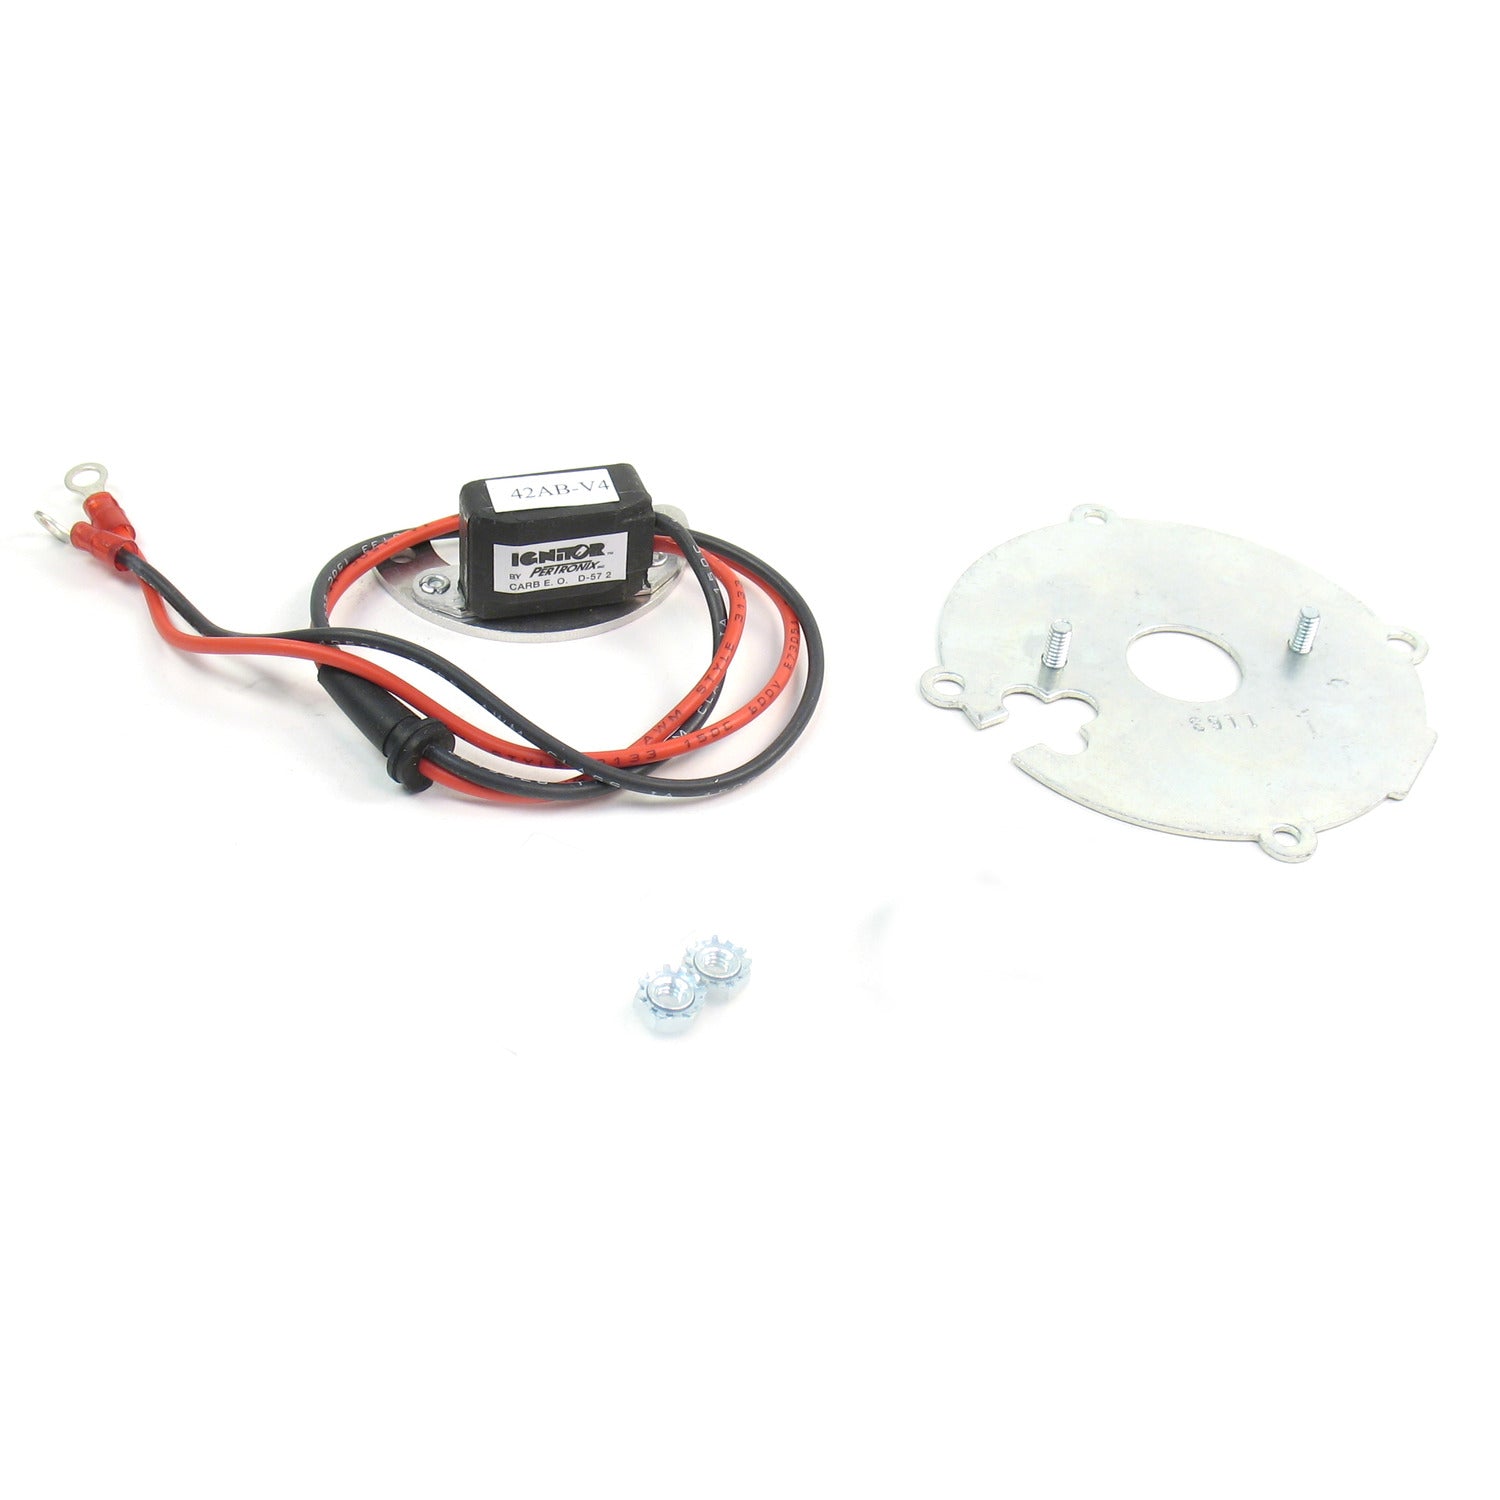 PerTronix 1163A0 Module replacement (only) (one module) for 1163A Ignitor Kit